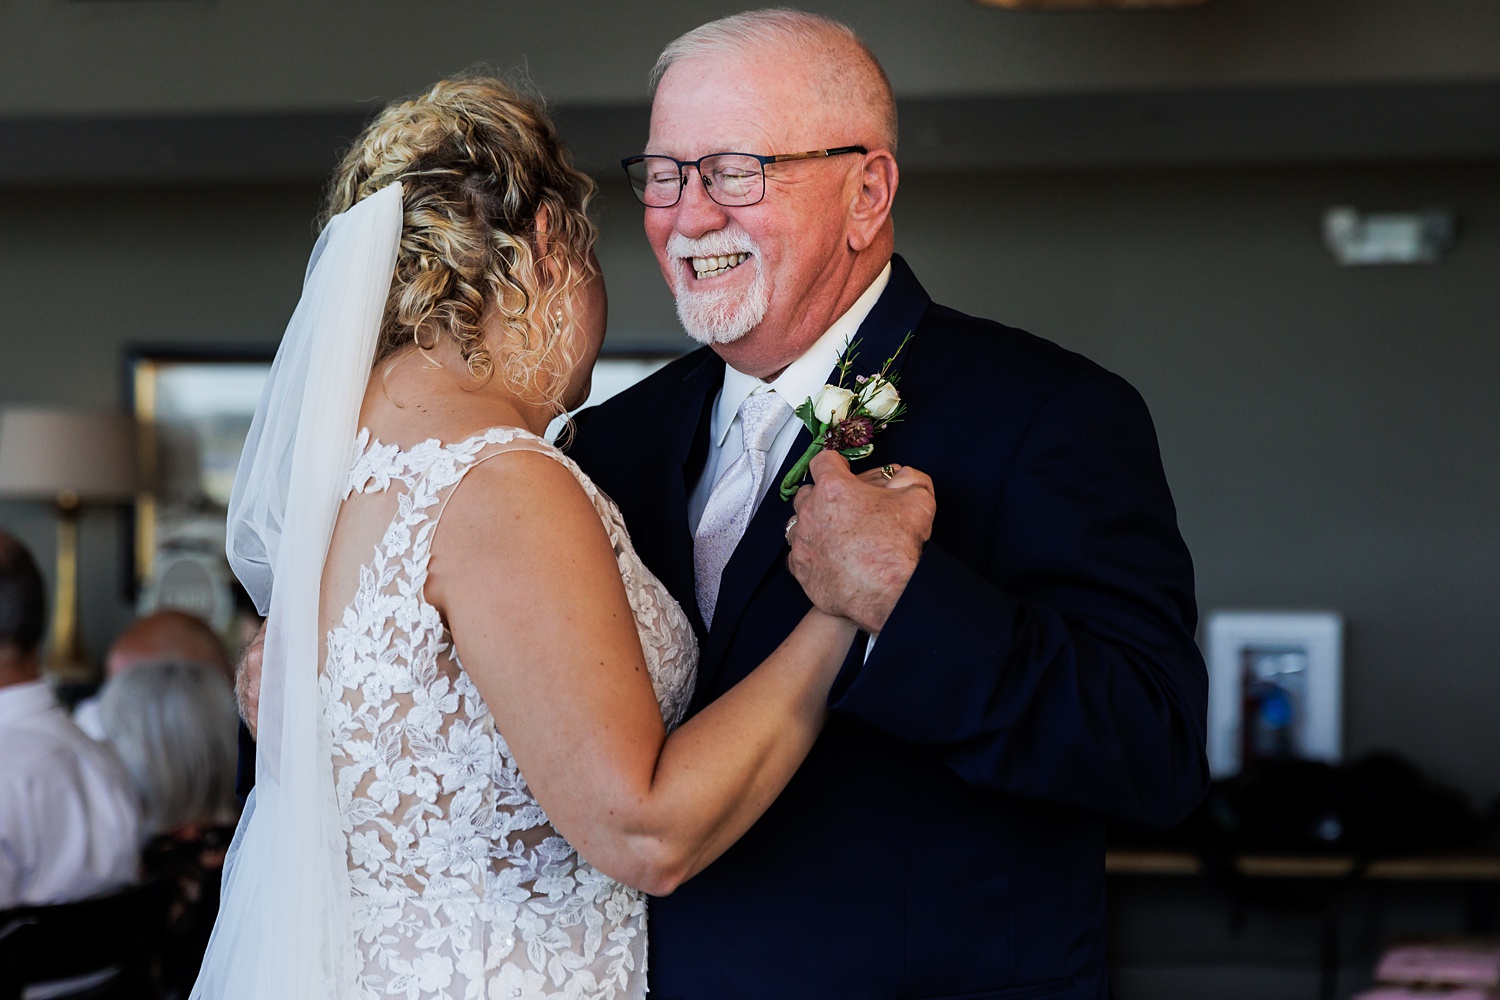 The bride and her father share a dance at the wedding reception in Maine